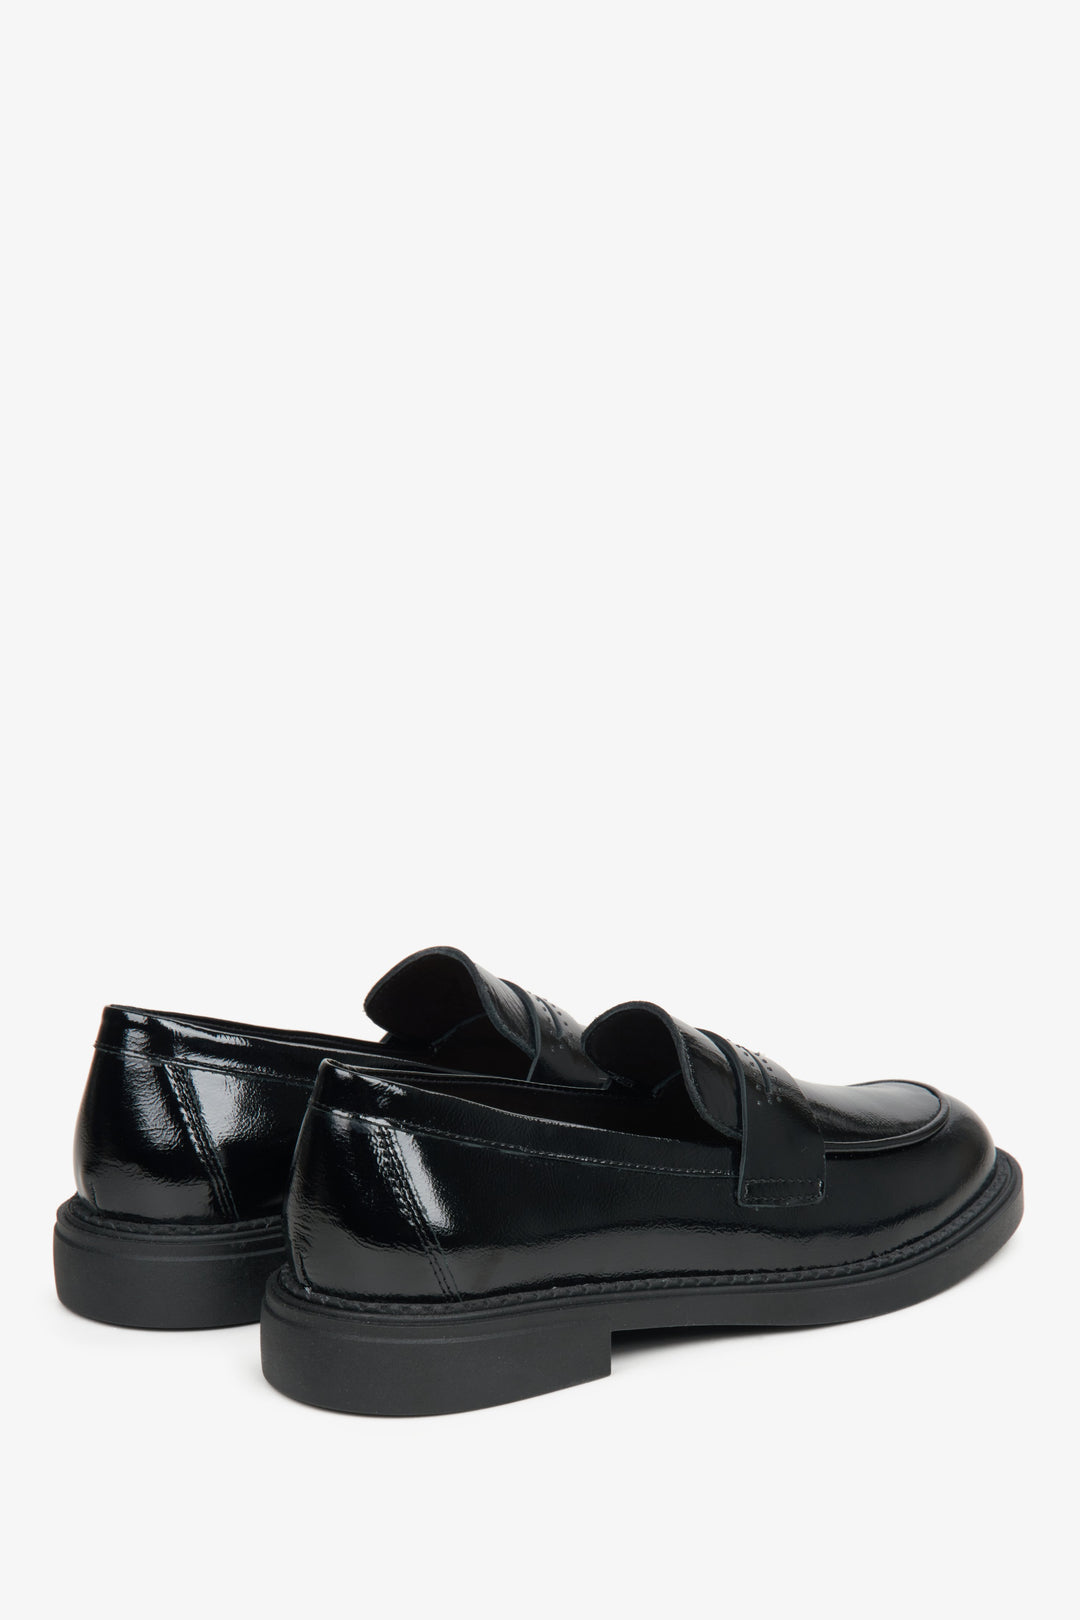 Women's leather moccasins in black Estro - a close-up of the heel.